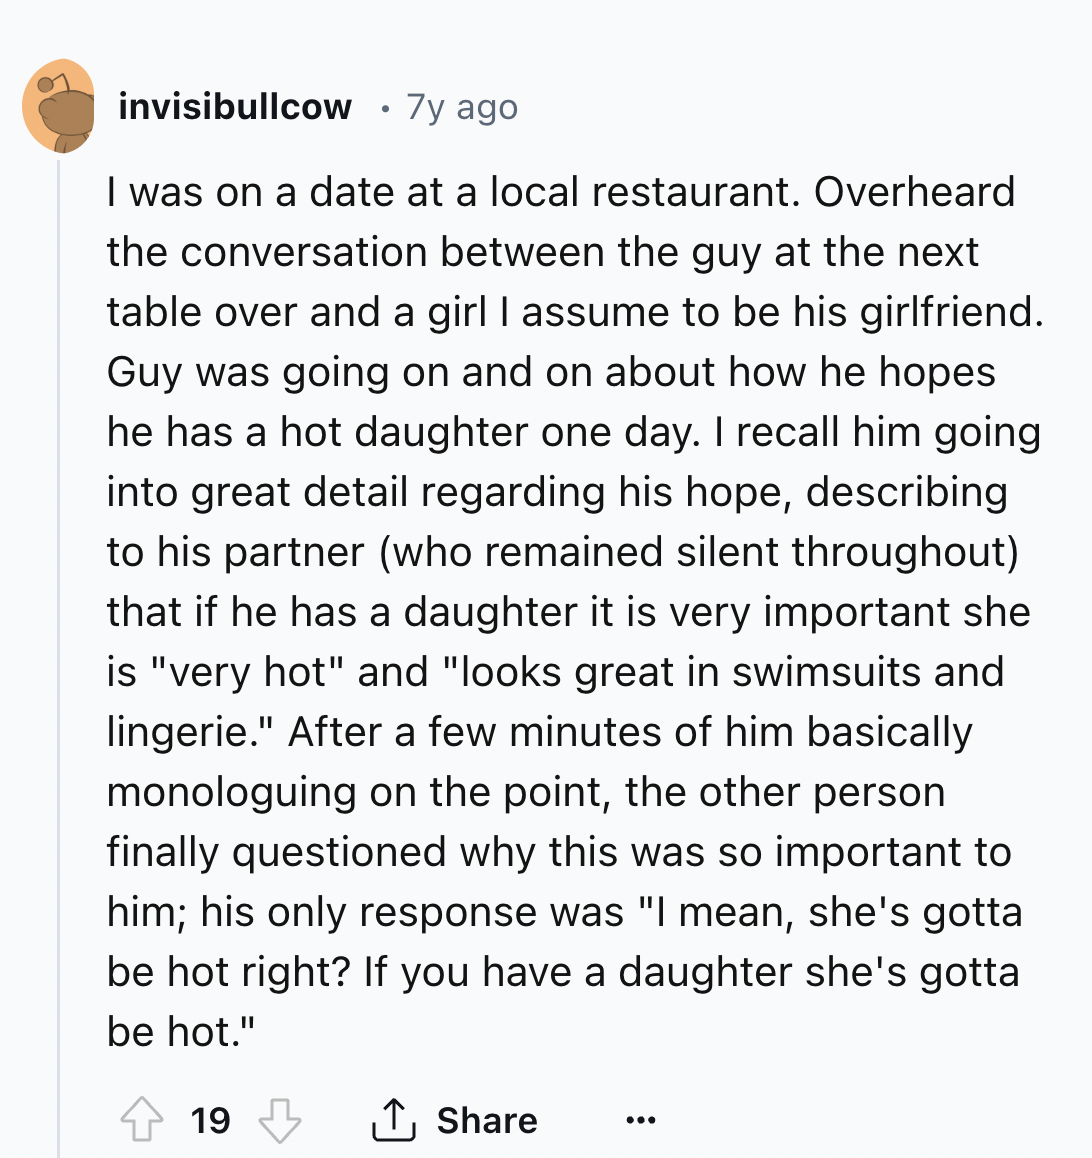 document - invisibullcow .7y ago I was on a date at a local restaurant. Overheard the conversation between the guy at the next table over and a girl I assume to be his girlfriend. Guy was going on and on about how he hopes he has a hot daughter one day. I